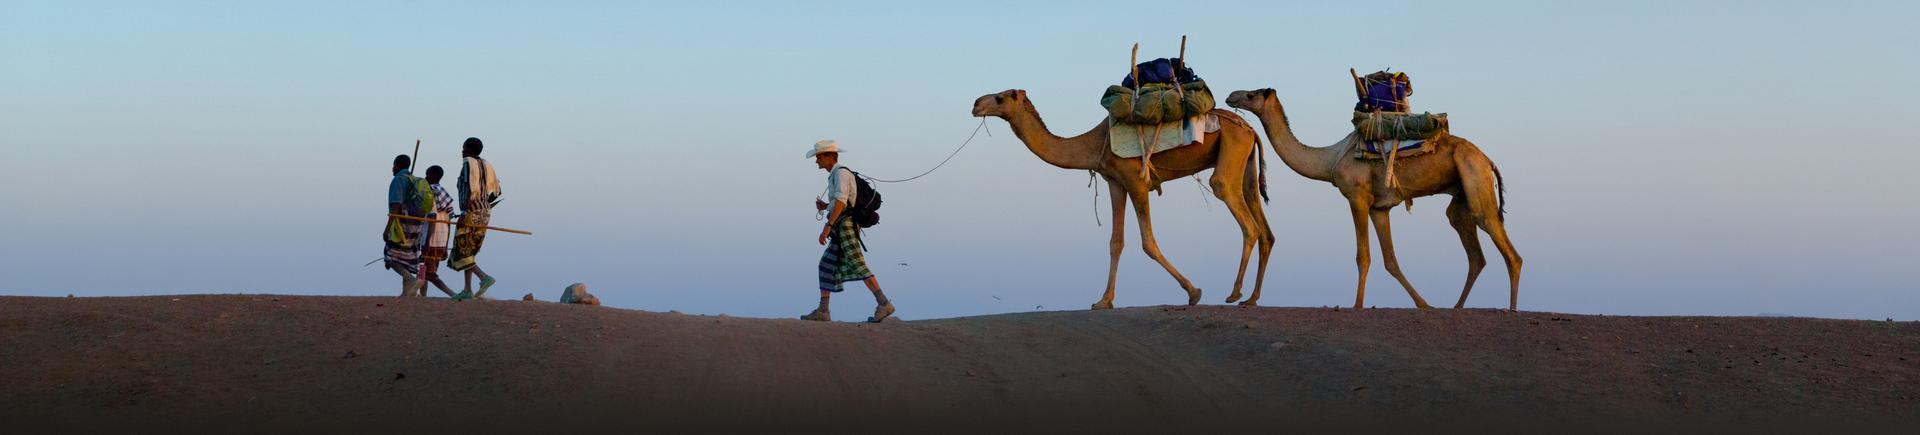 man with guide and camels